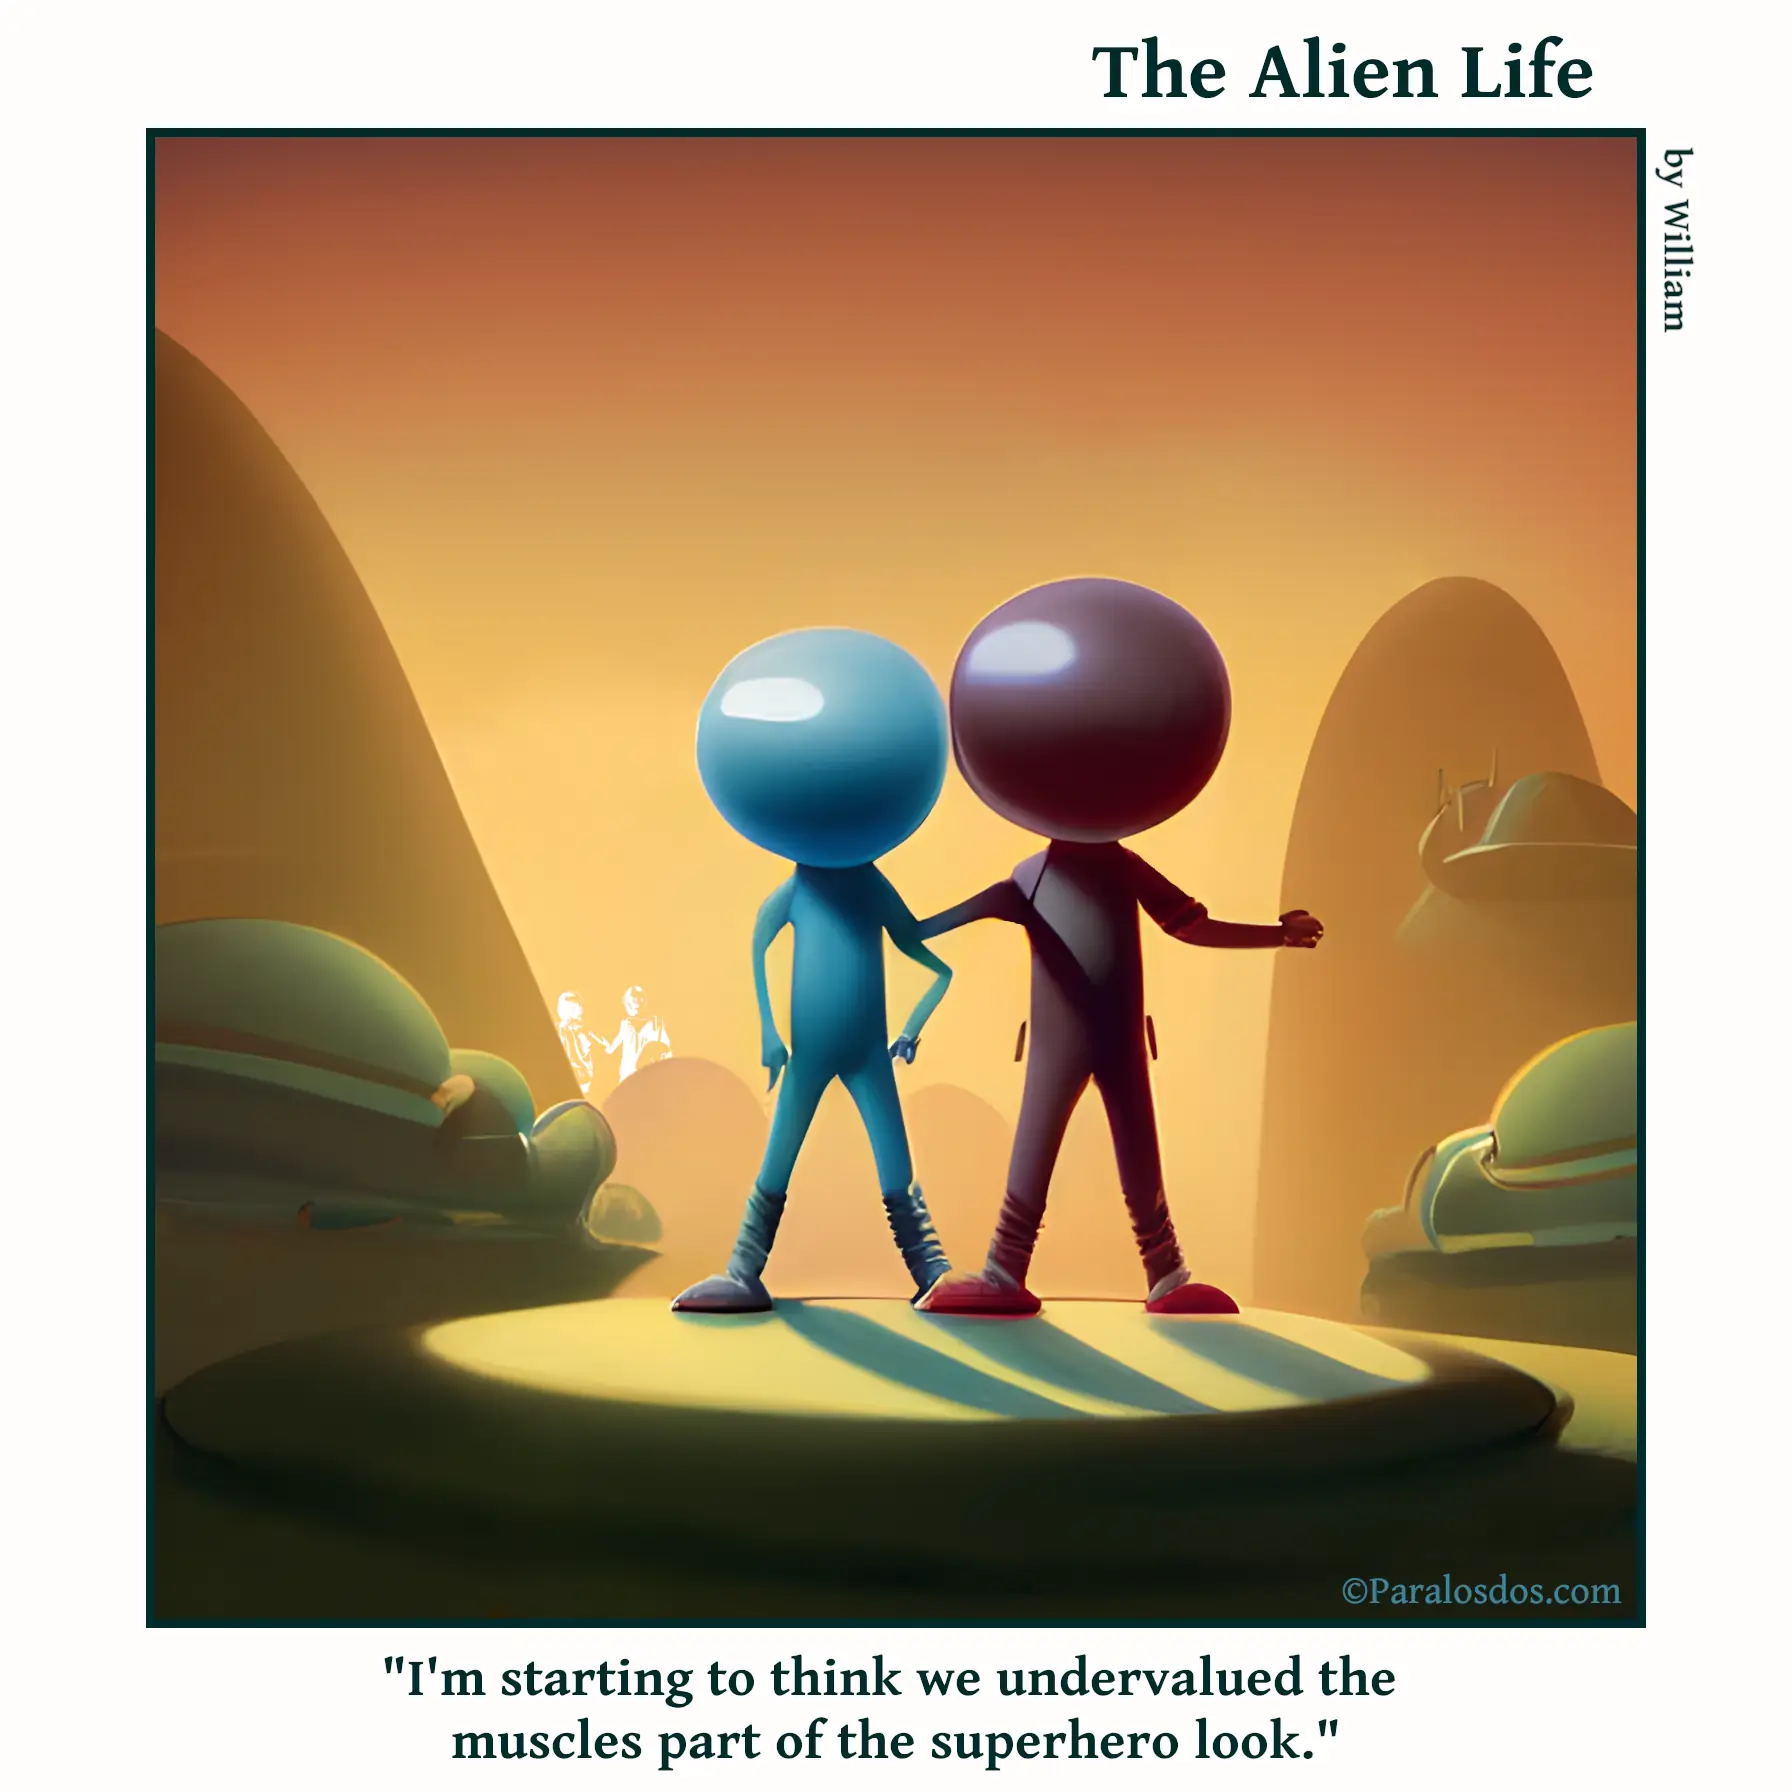 The Alien Life, one panel Comic. Two skinny aliens are posing on a podium outside wearing superhero costumes. The caption reads: "I'm starting to think we undervalued the muscles part of the superhero look."